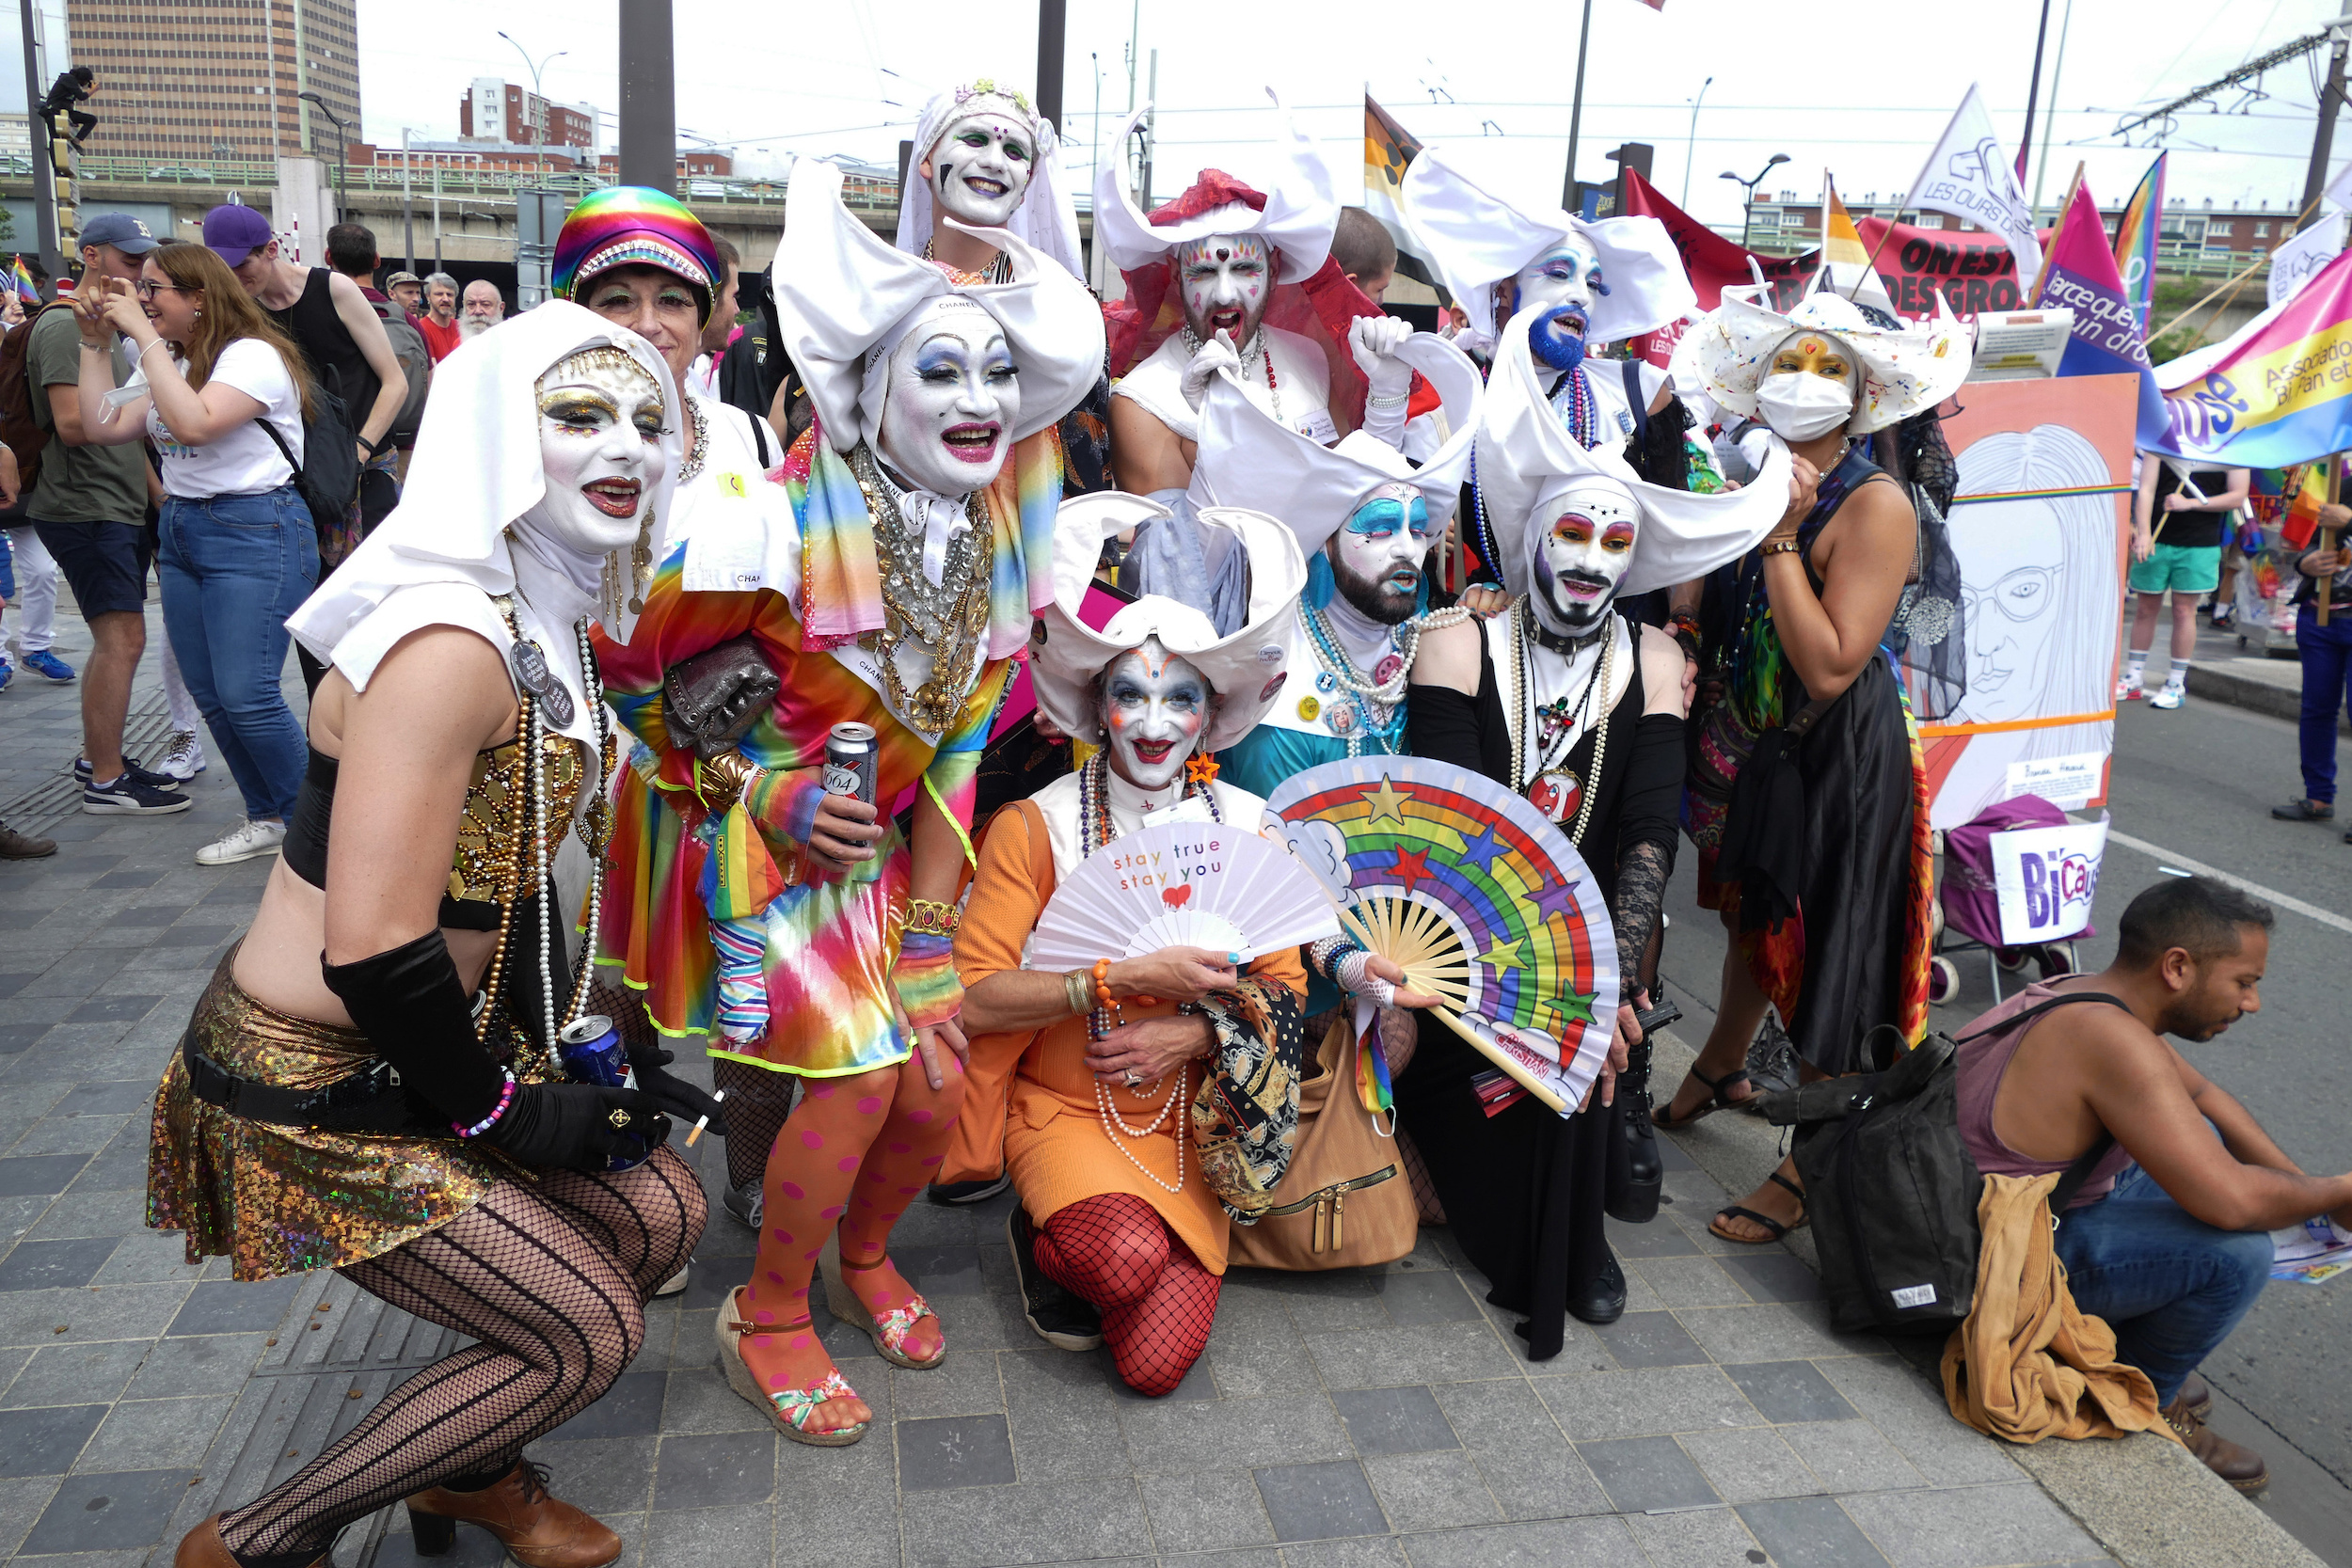 Members of The Sisters of Perpetual Indulgence pose at a pride event.